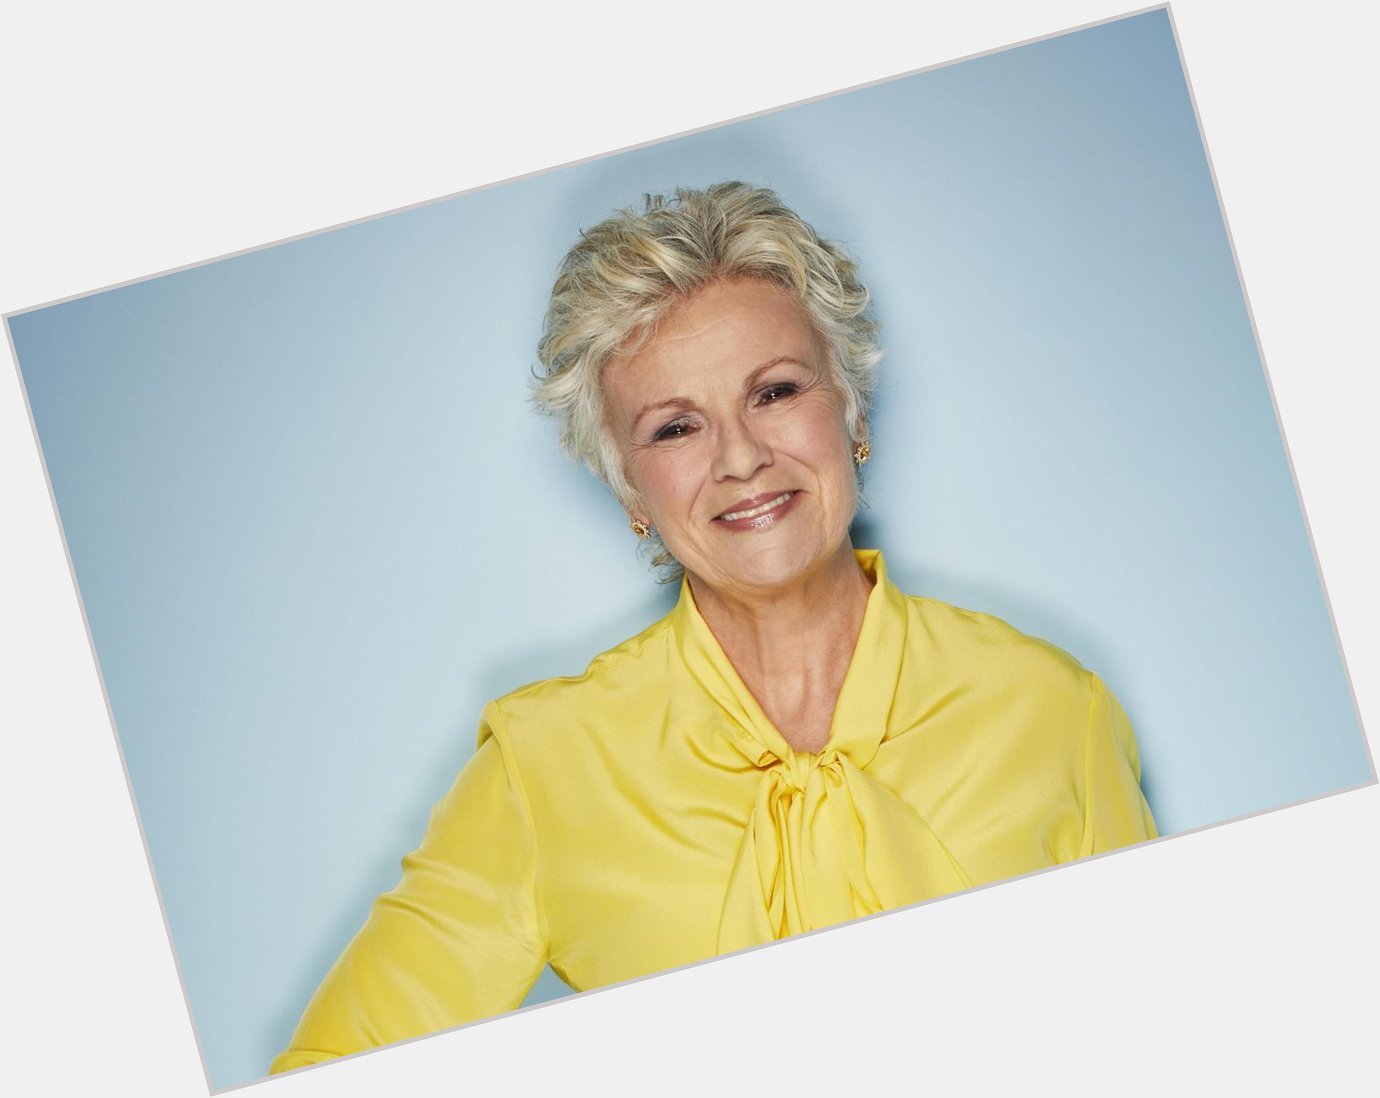 Wishing a very Happy Birthday to Cranleigh legend and patron Julie Walters DBE. 